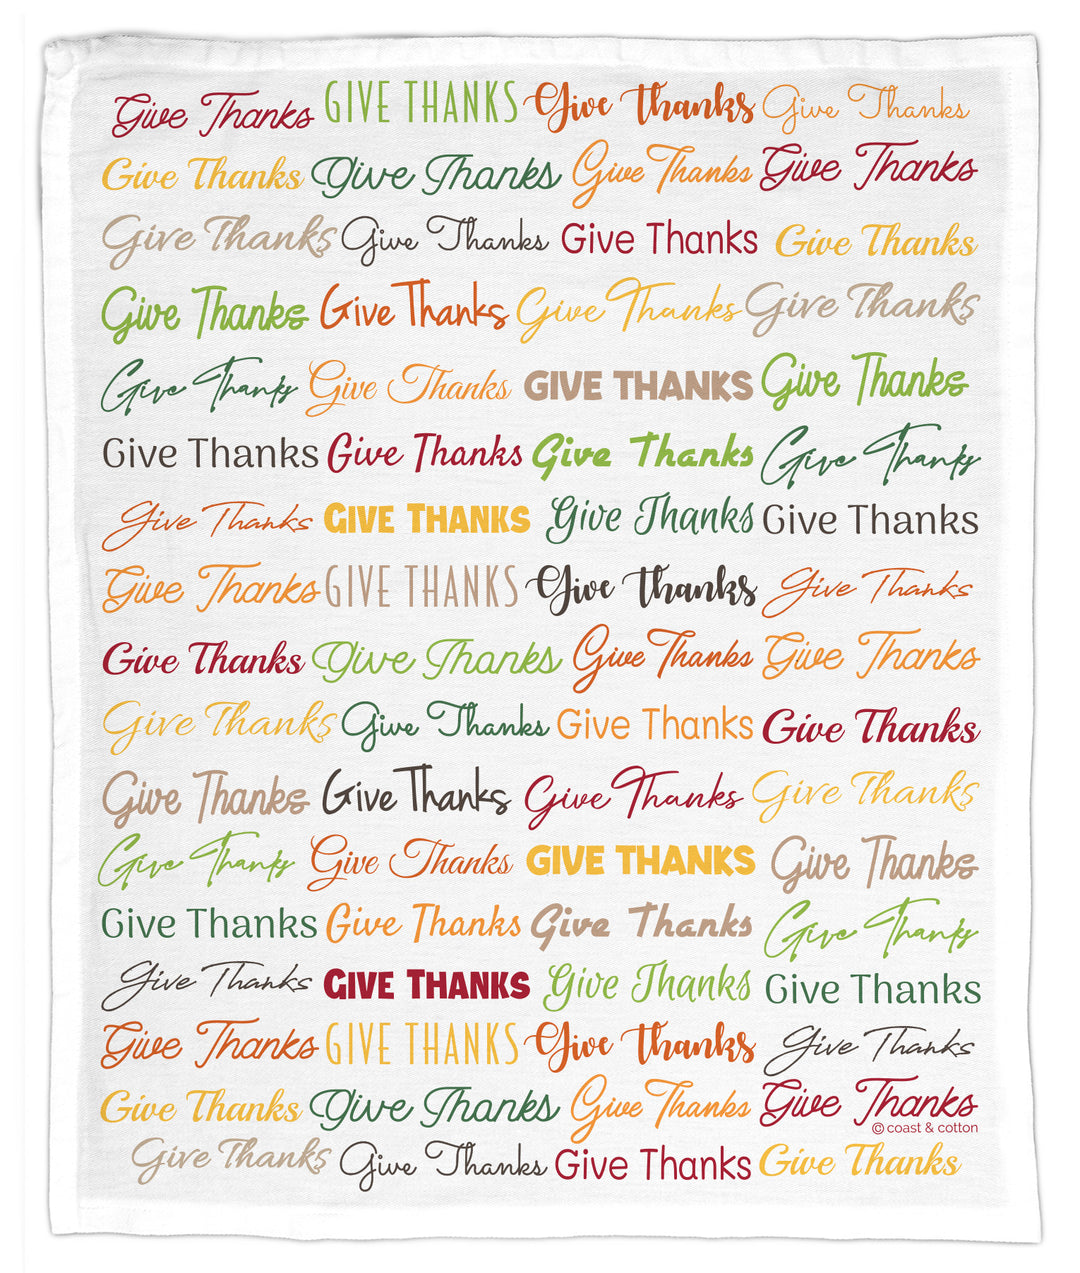 Give Thanks Expressions, Hand Towel